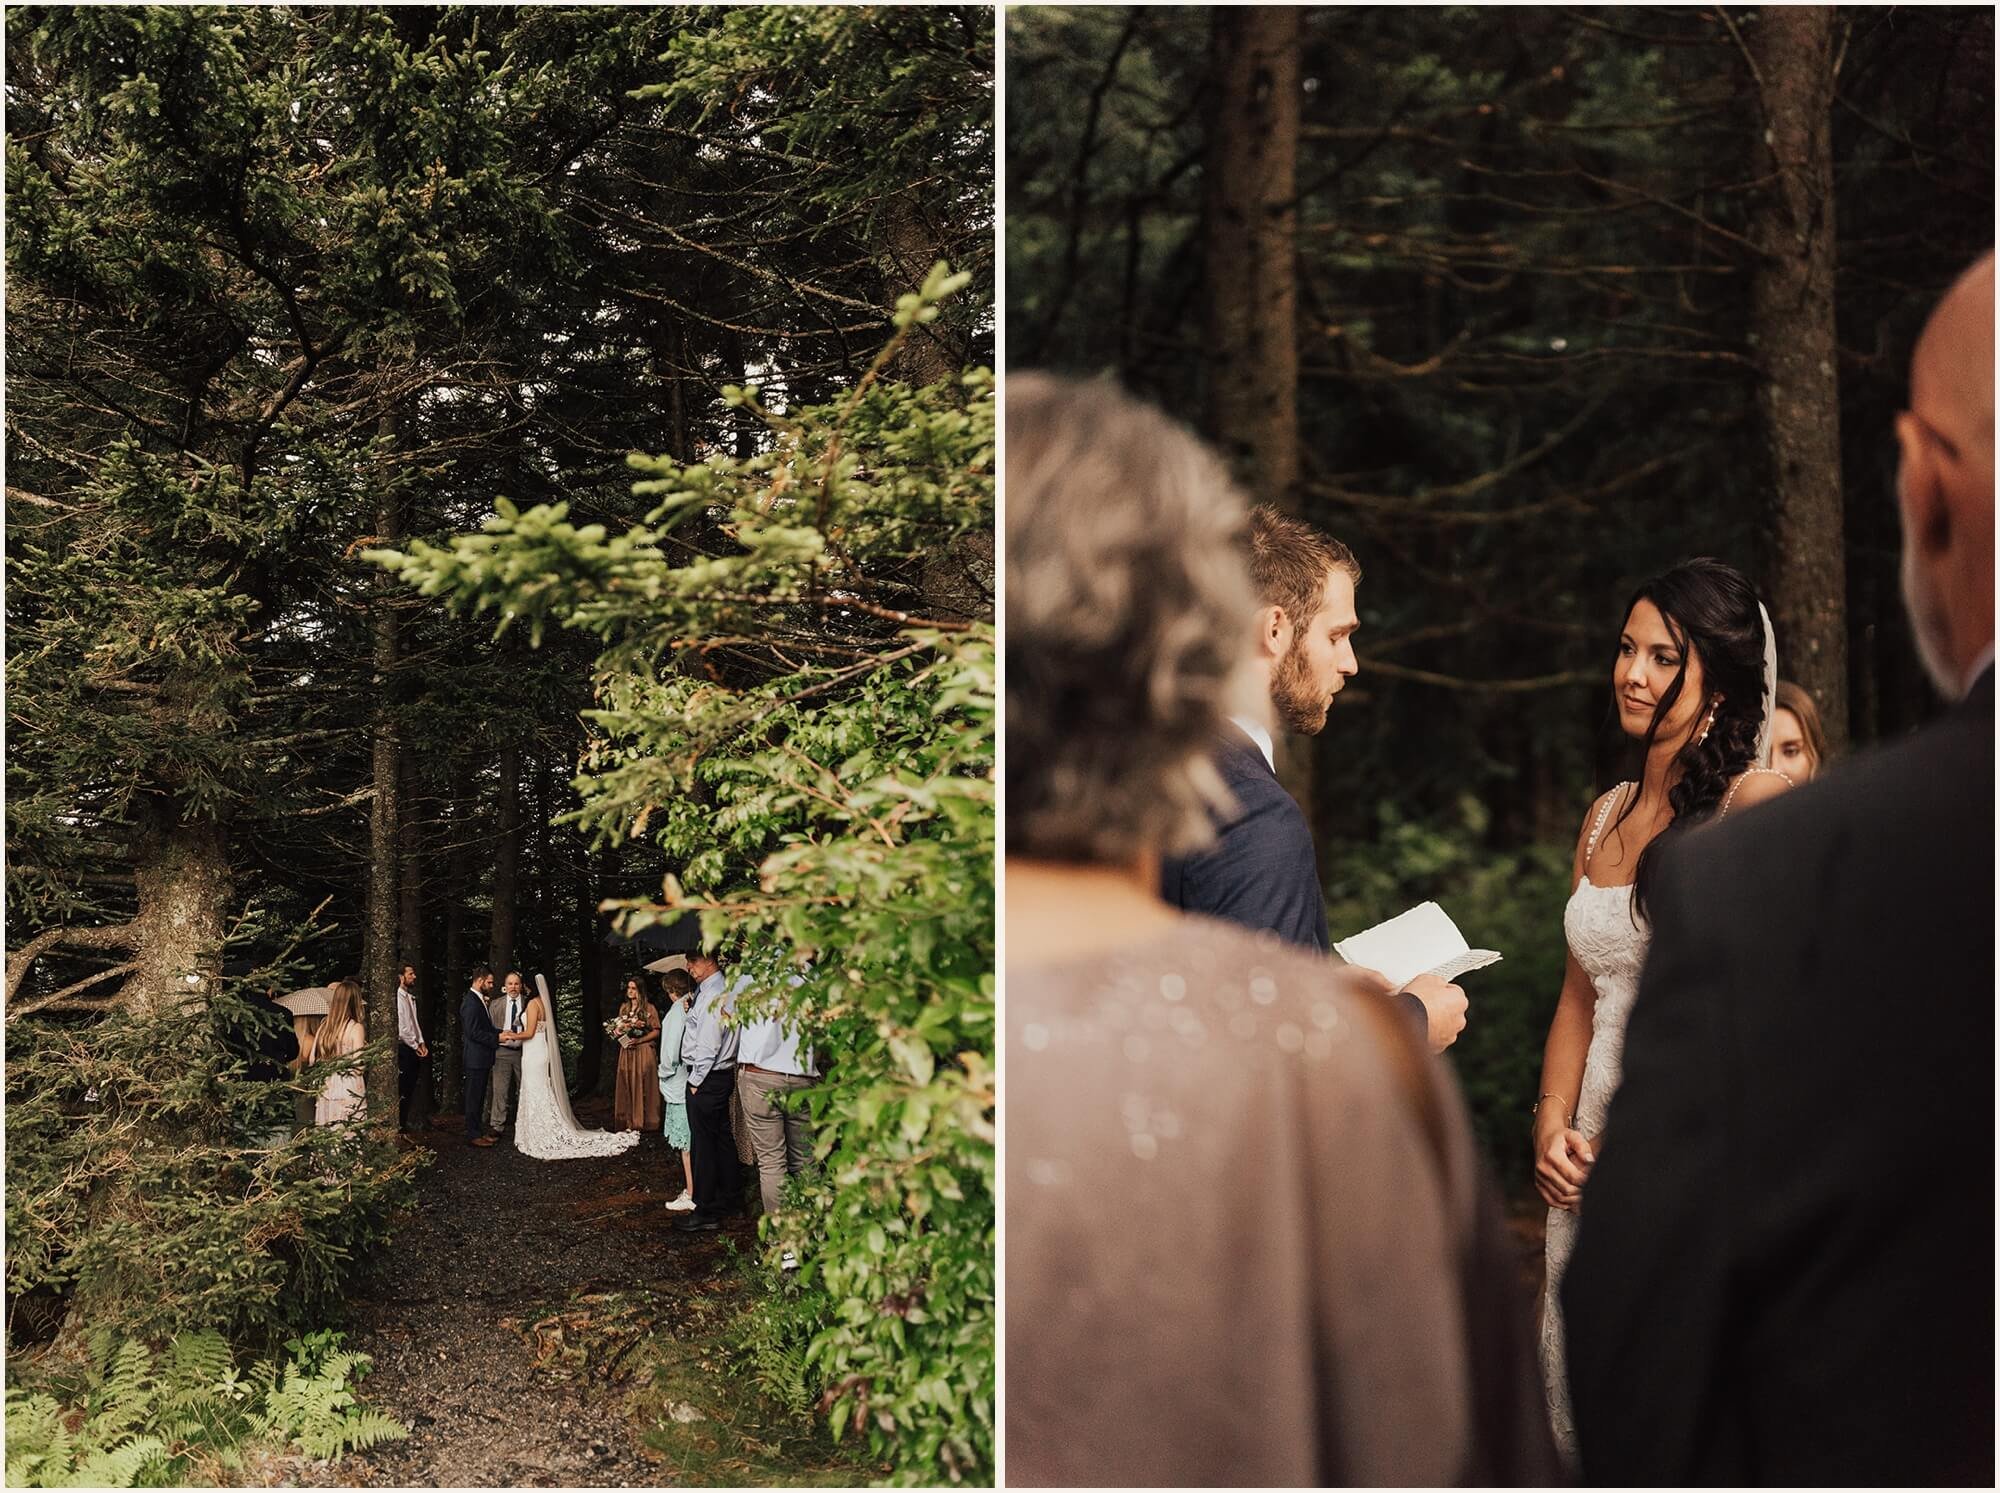 Bride and groom getting married in the forest of the Blue Ridge Mountains